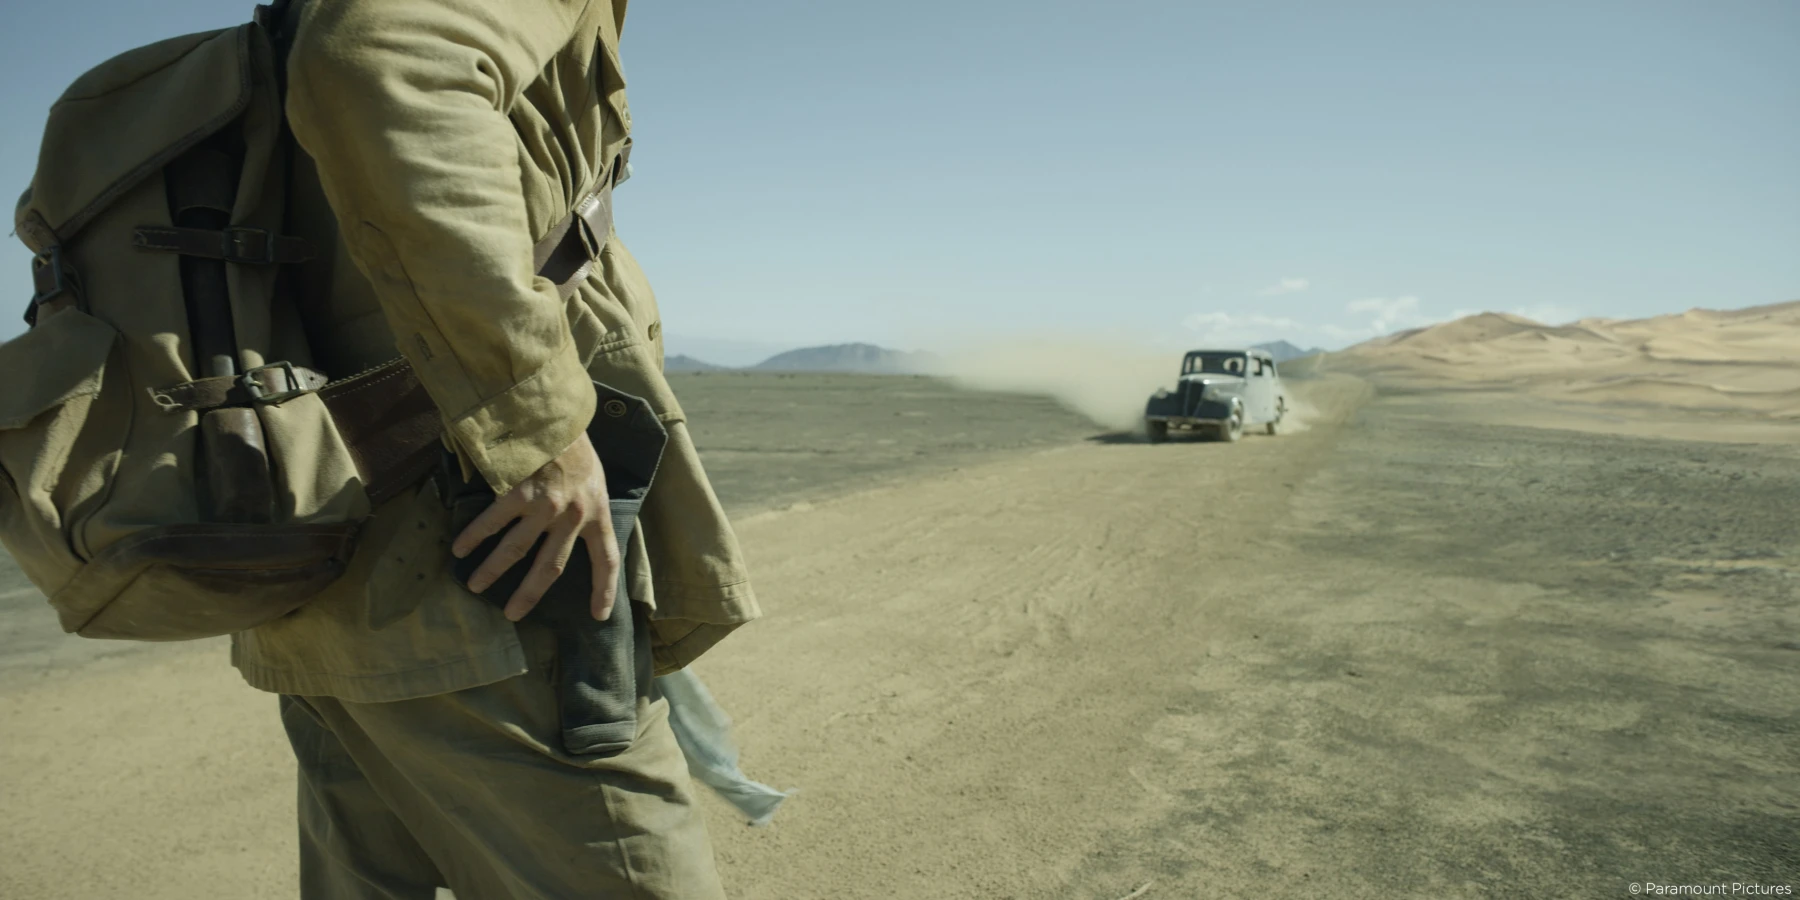  Man and a car coming in desert shot from Raynault vfx 